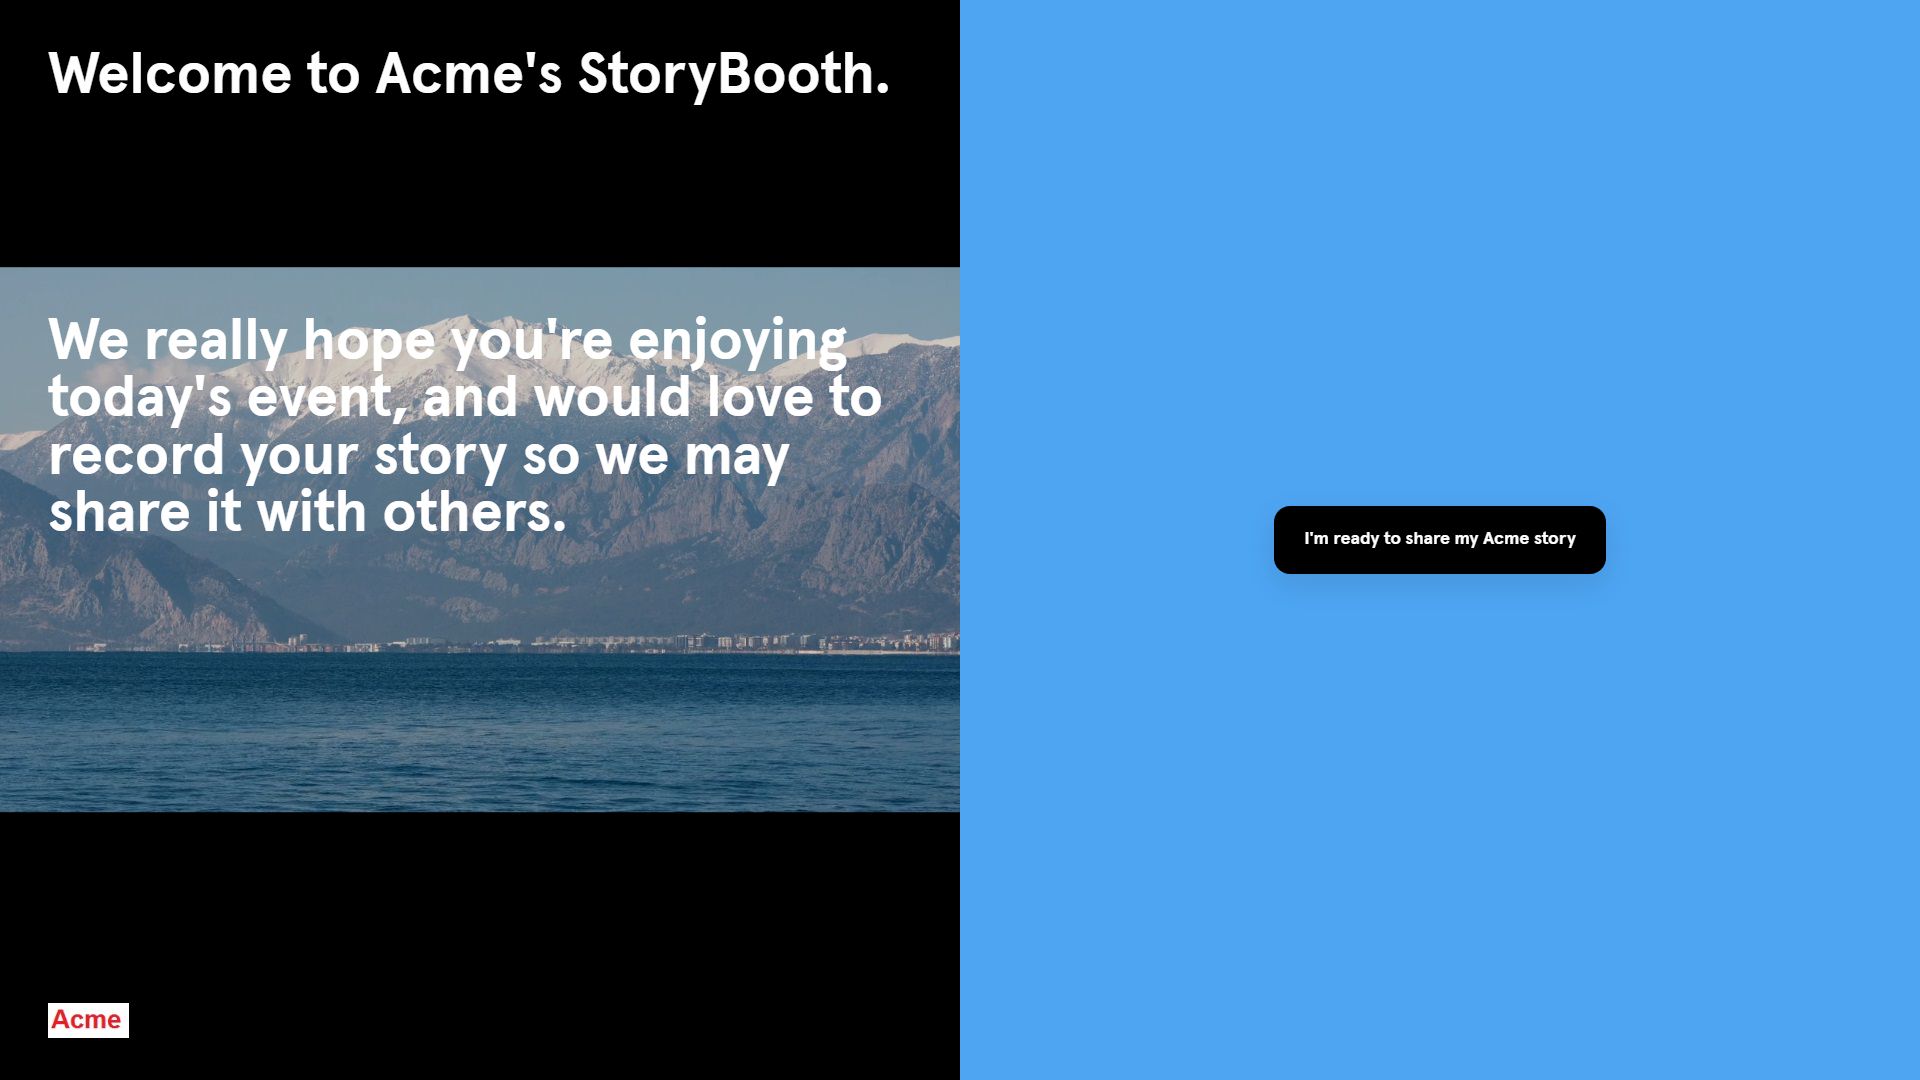 the welcome page of the story booth application demo featuring Acme brand with overlay text